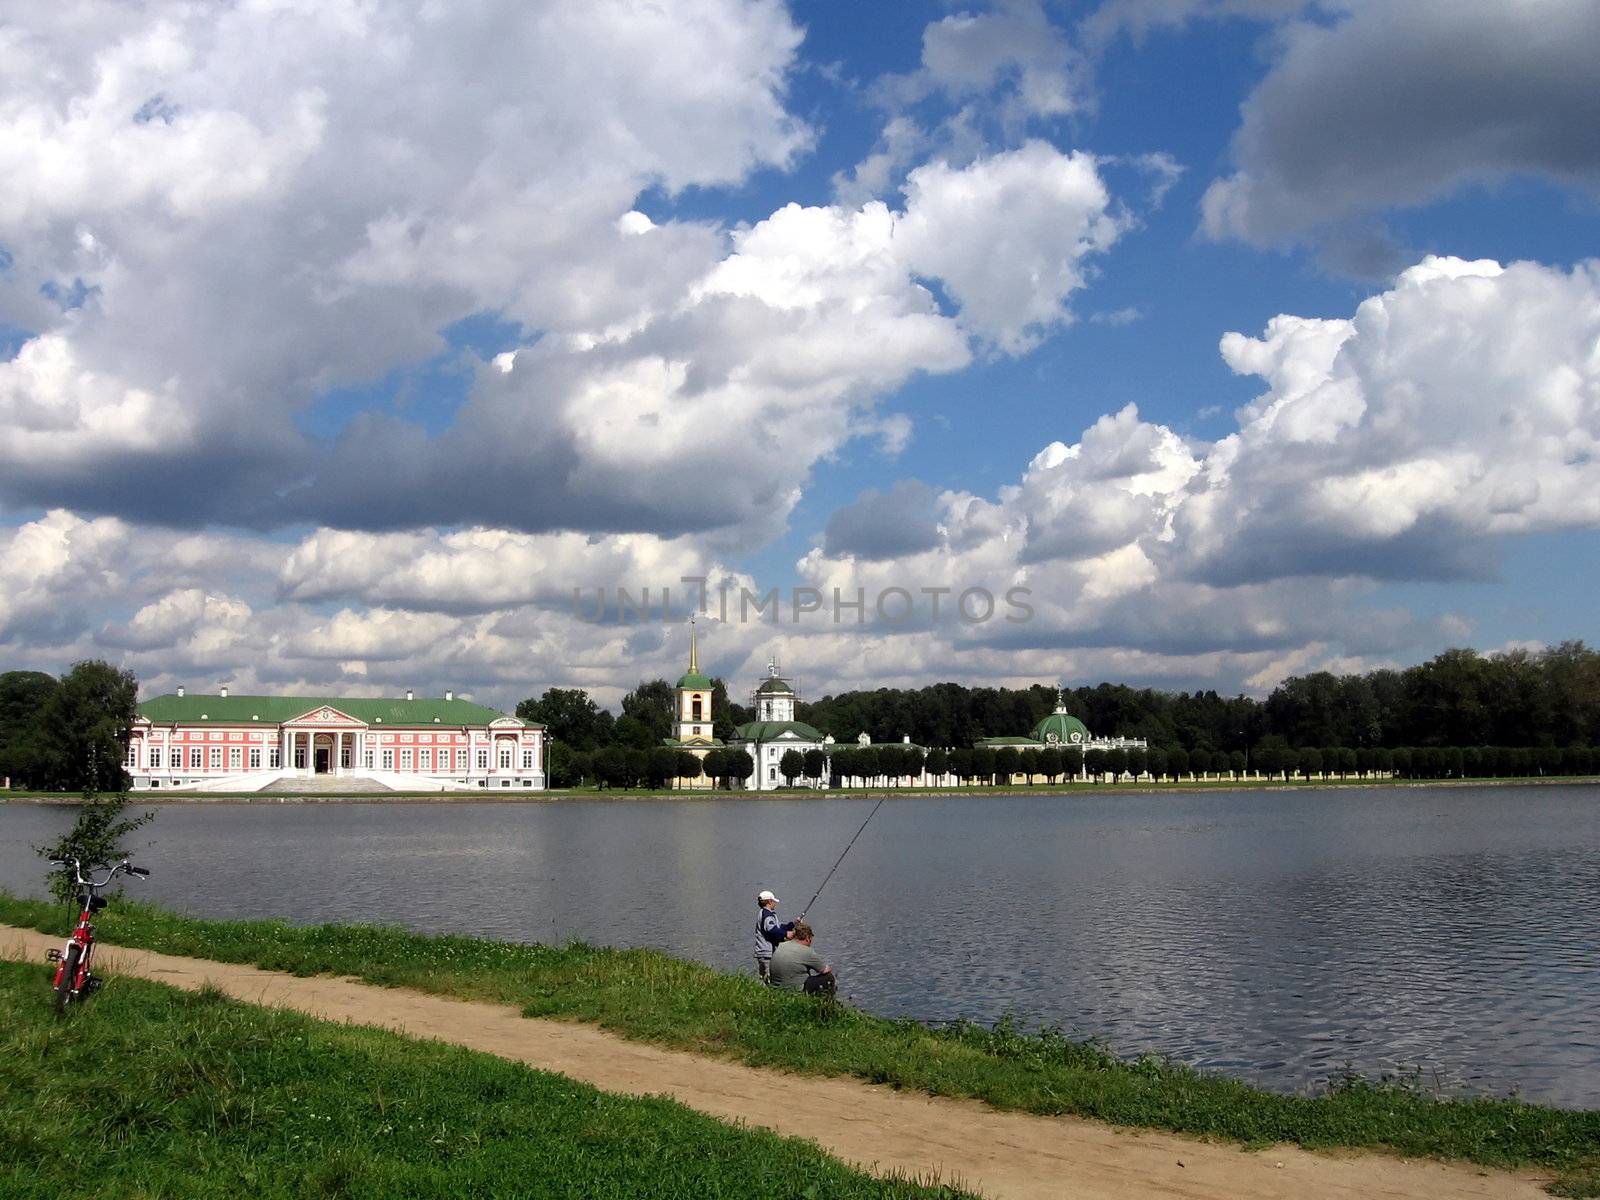 Fishing at the lake near historical architectures